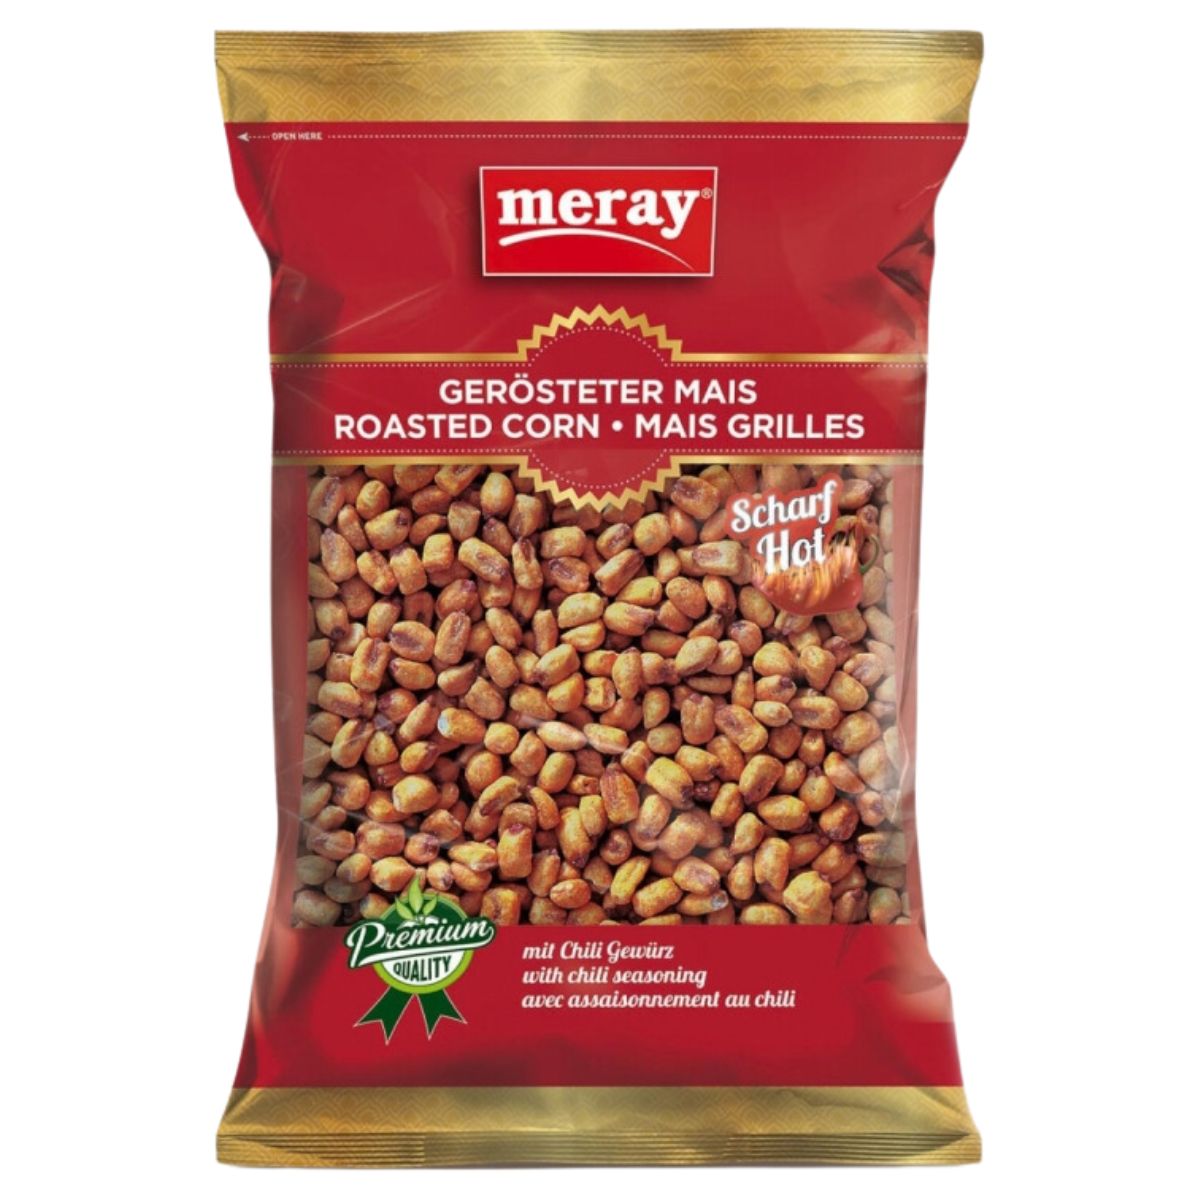 Meray - Roasted Corn Scharf Hot - 150g roasted peanuts and pistachios.